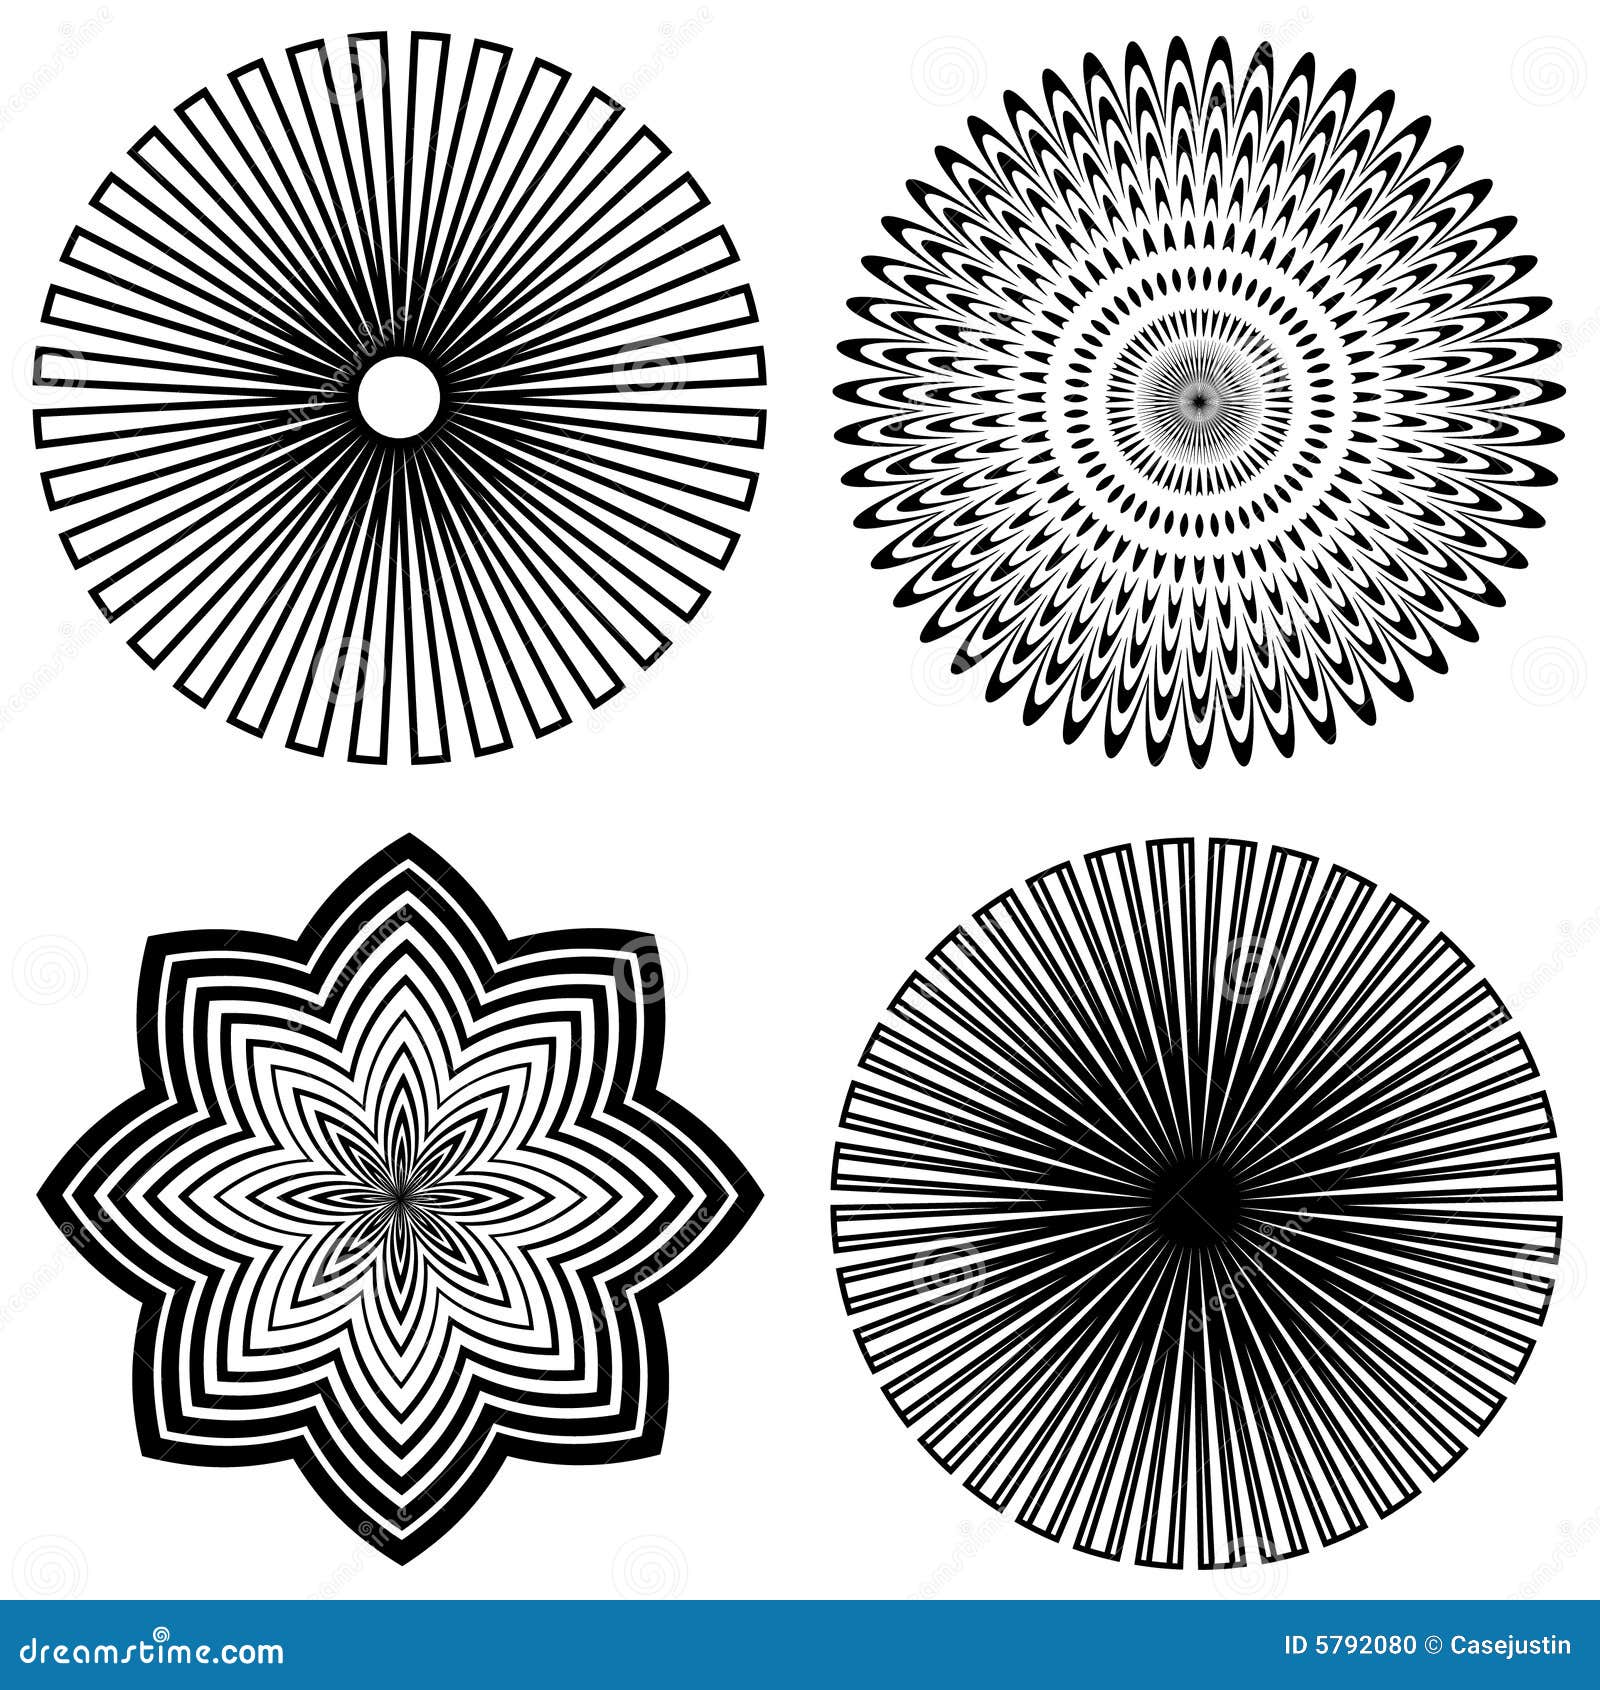 Outline Spirals stock vector. Illustration of illusion - 5792080